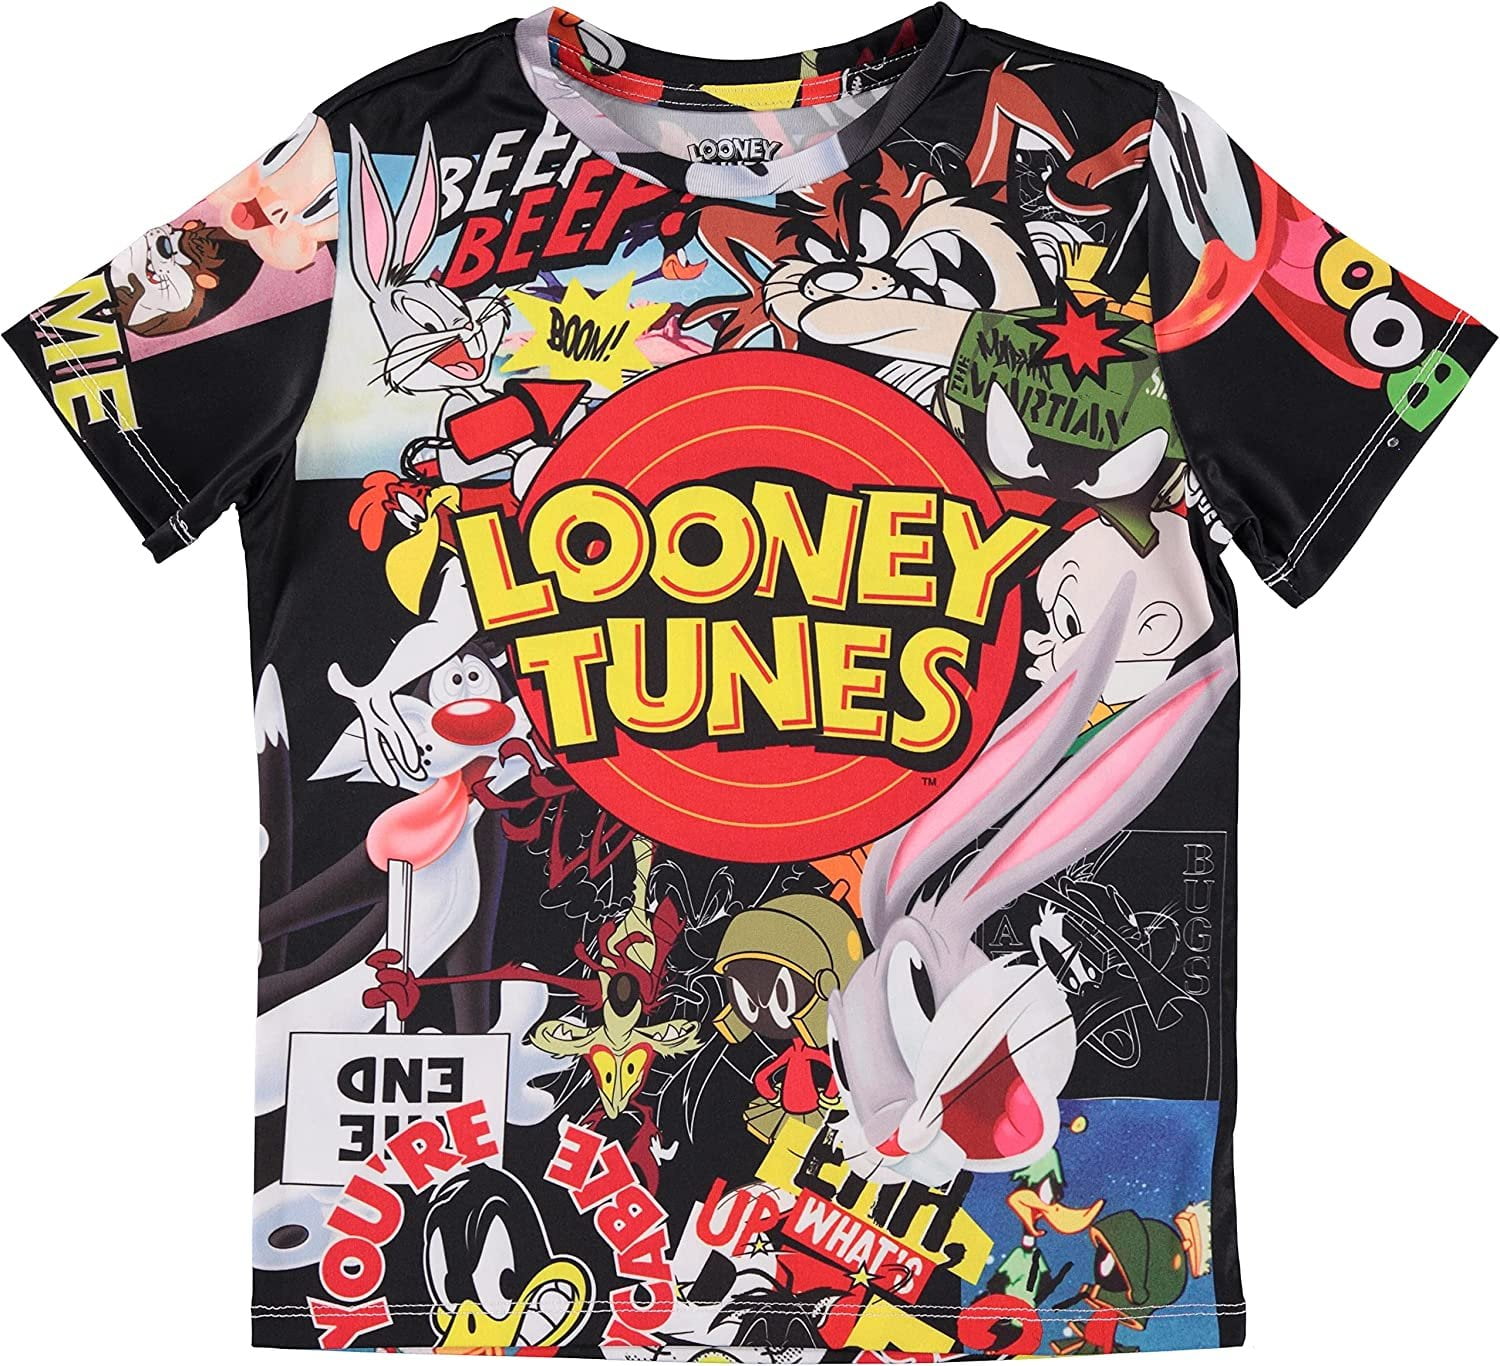 Allover Group Tee - - Taz T-Shirt Bugs and White, Sublimated Tunes Boys Shirt 4/5 Marvin Looney 90s Bunny